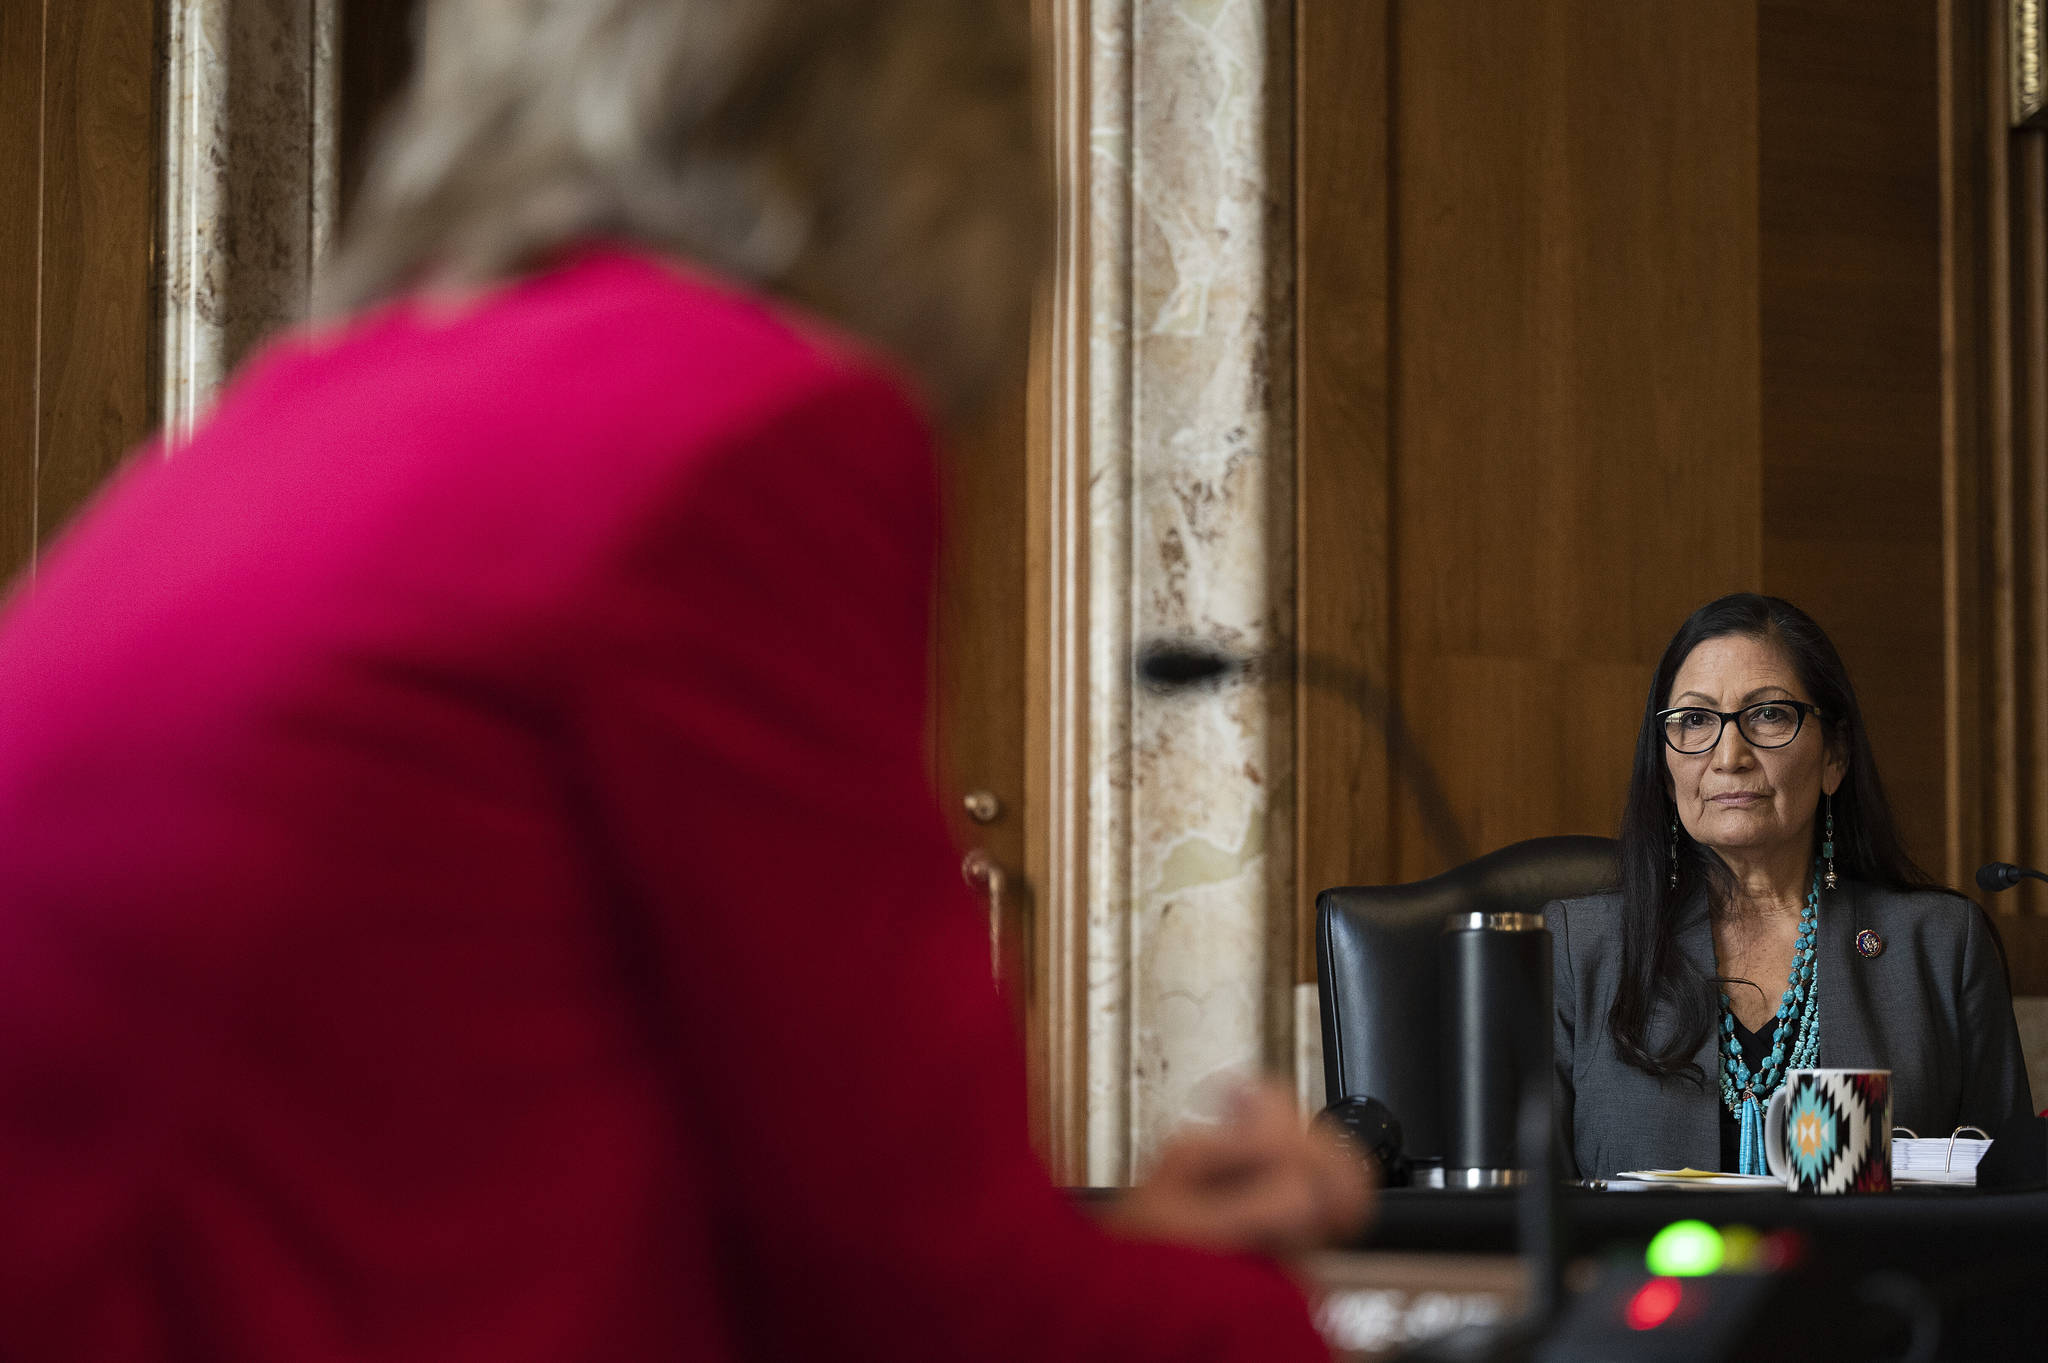 Rep. Deb Haaland, D-N.M., is questioned by Sen. Cindy Hyde-Smith, R-Miss., during the Senate Committee on Energy and Natural Resources hearing on her nomination to be Interior Secretary, Tuesday, Feb. 23, 2021 on Capitol Hill in Washington. (Jim Watson / Pool)